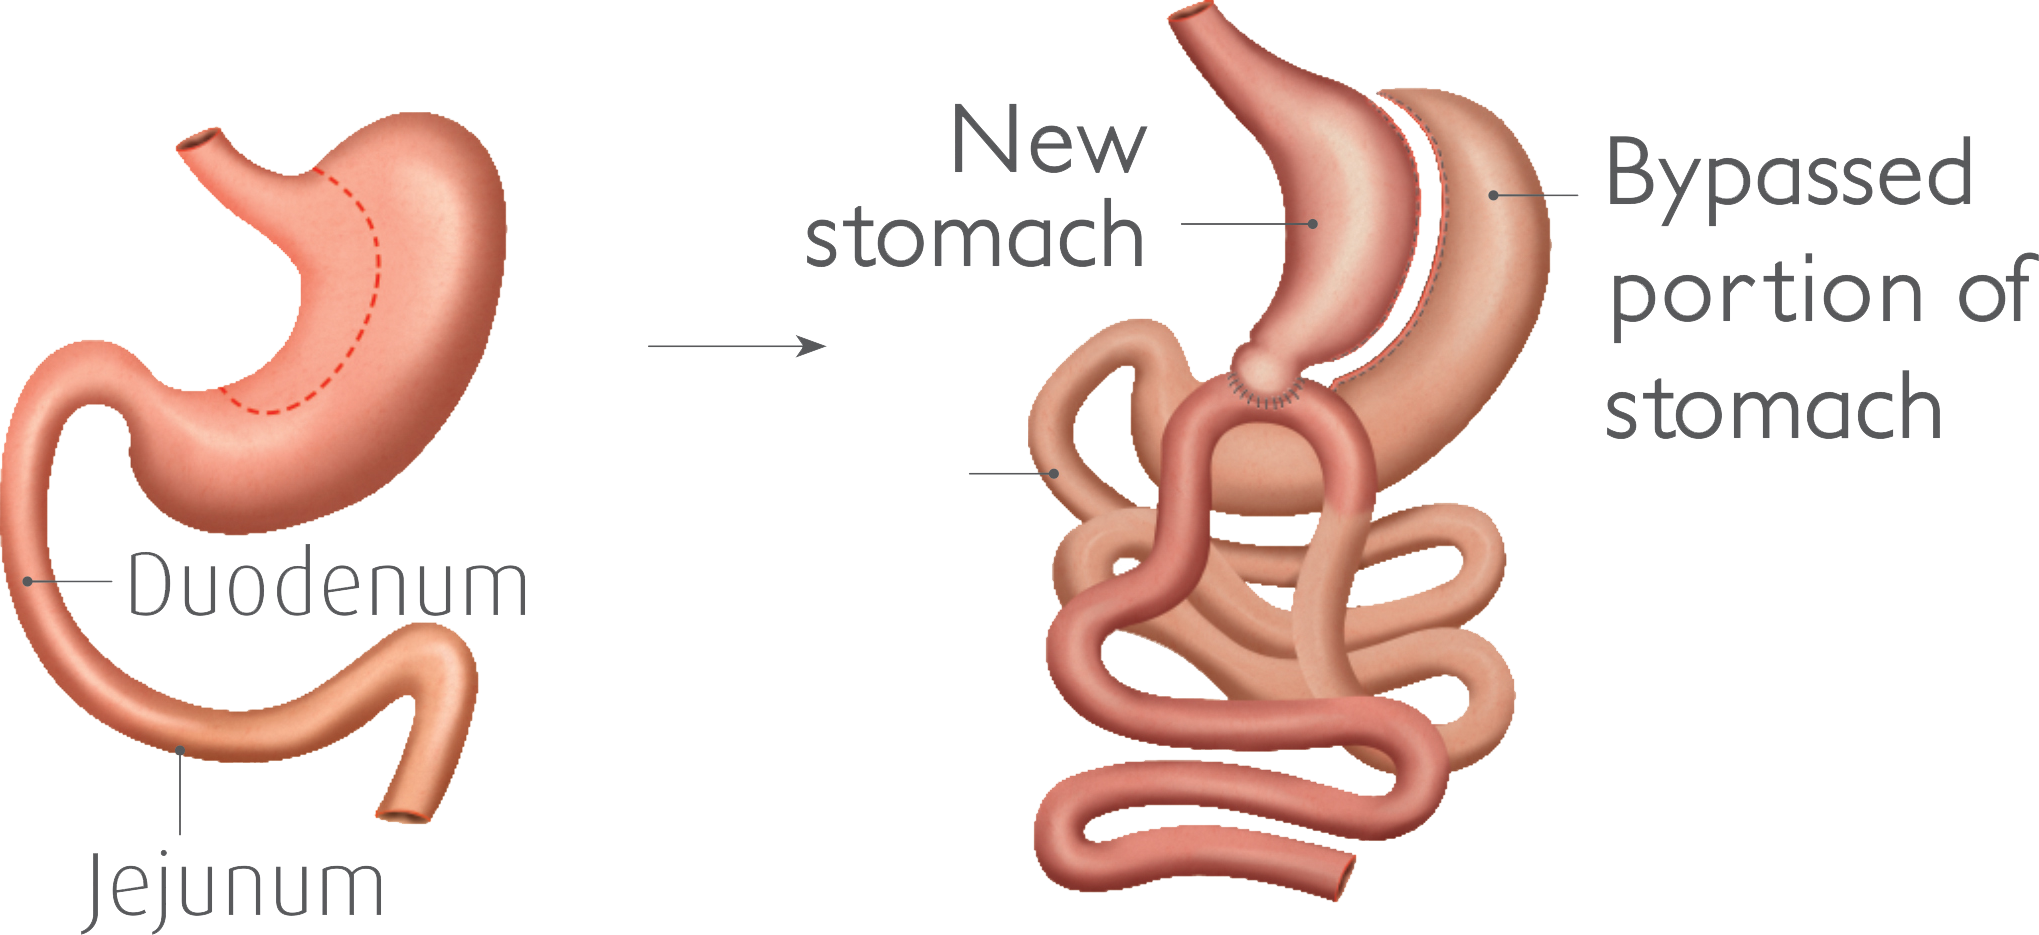 Gastric Bypass Weight Loss: Essential Guide, Chart and Timeline